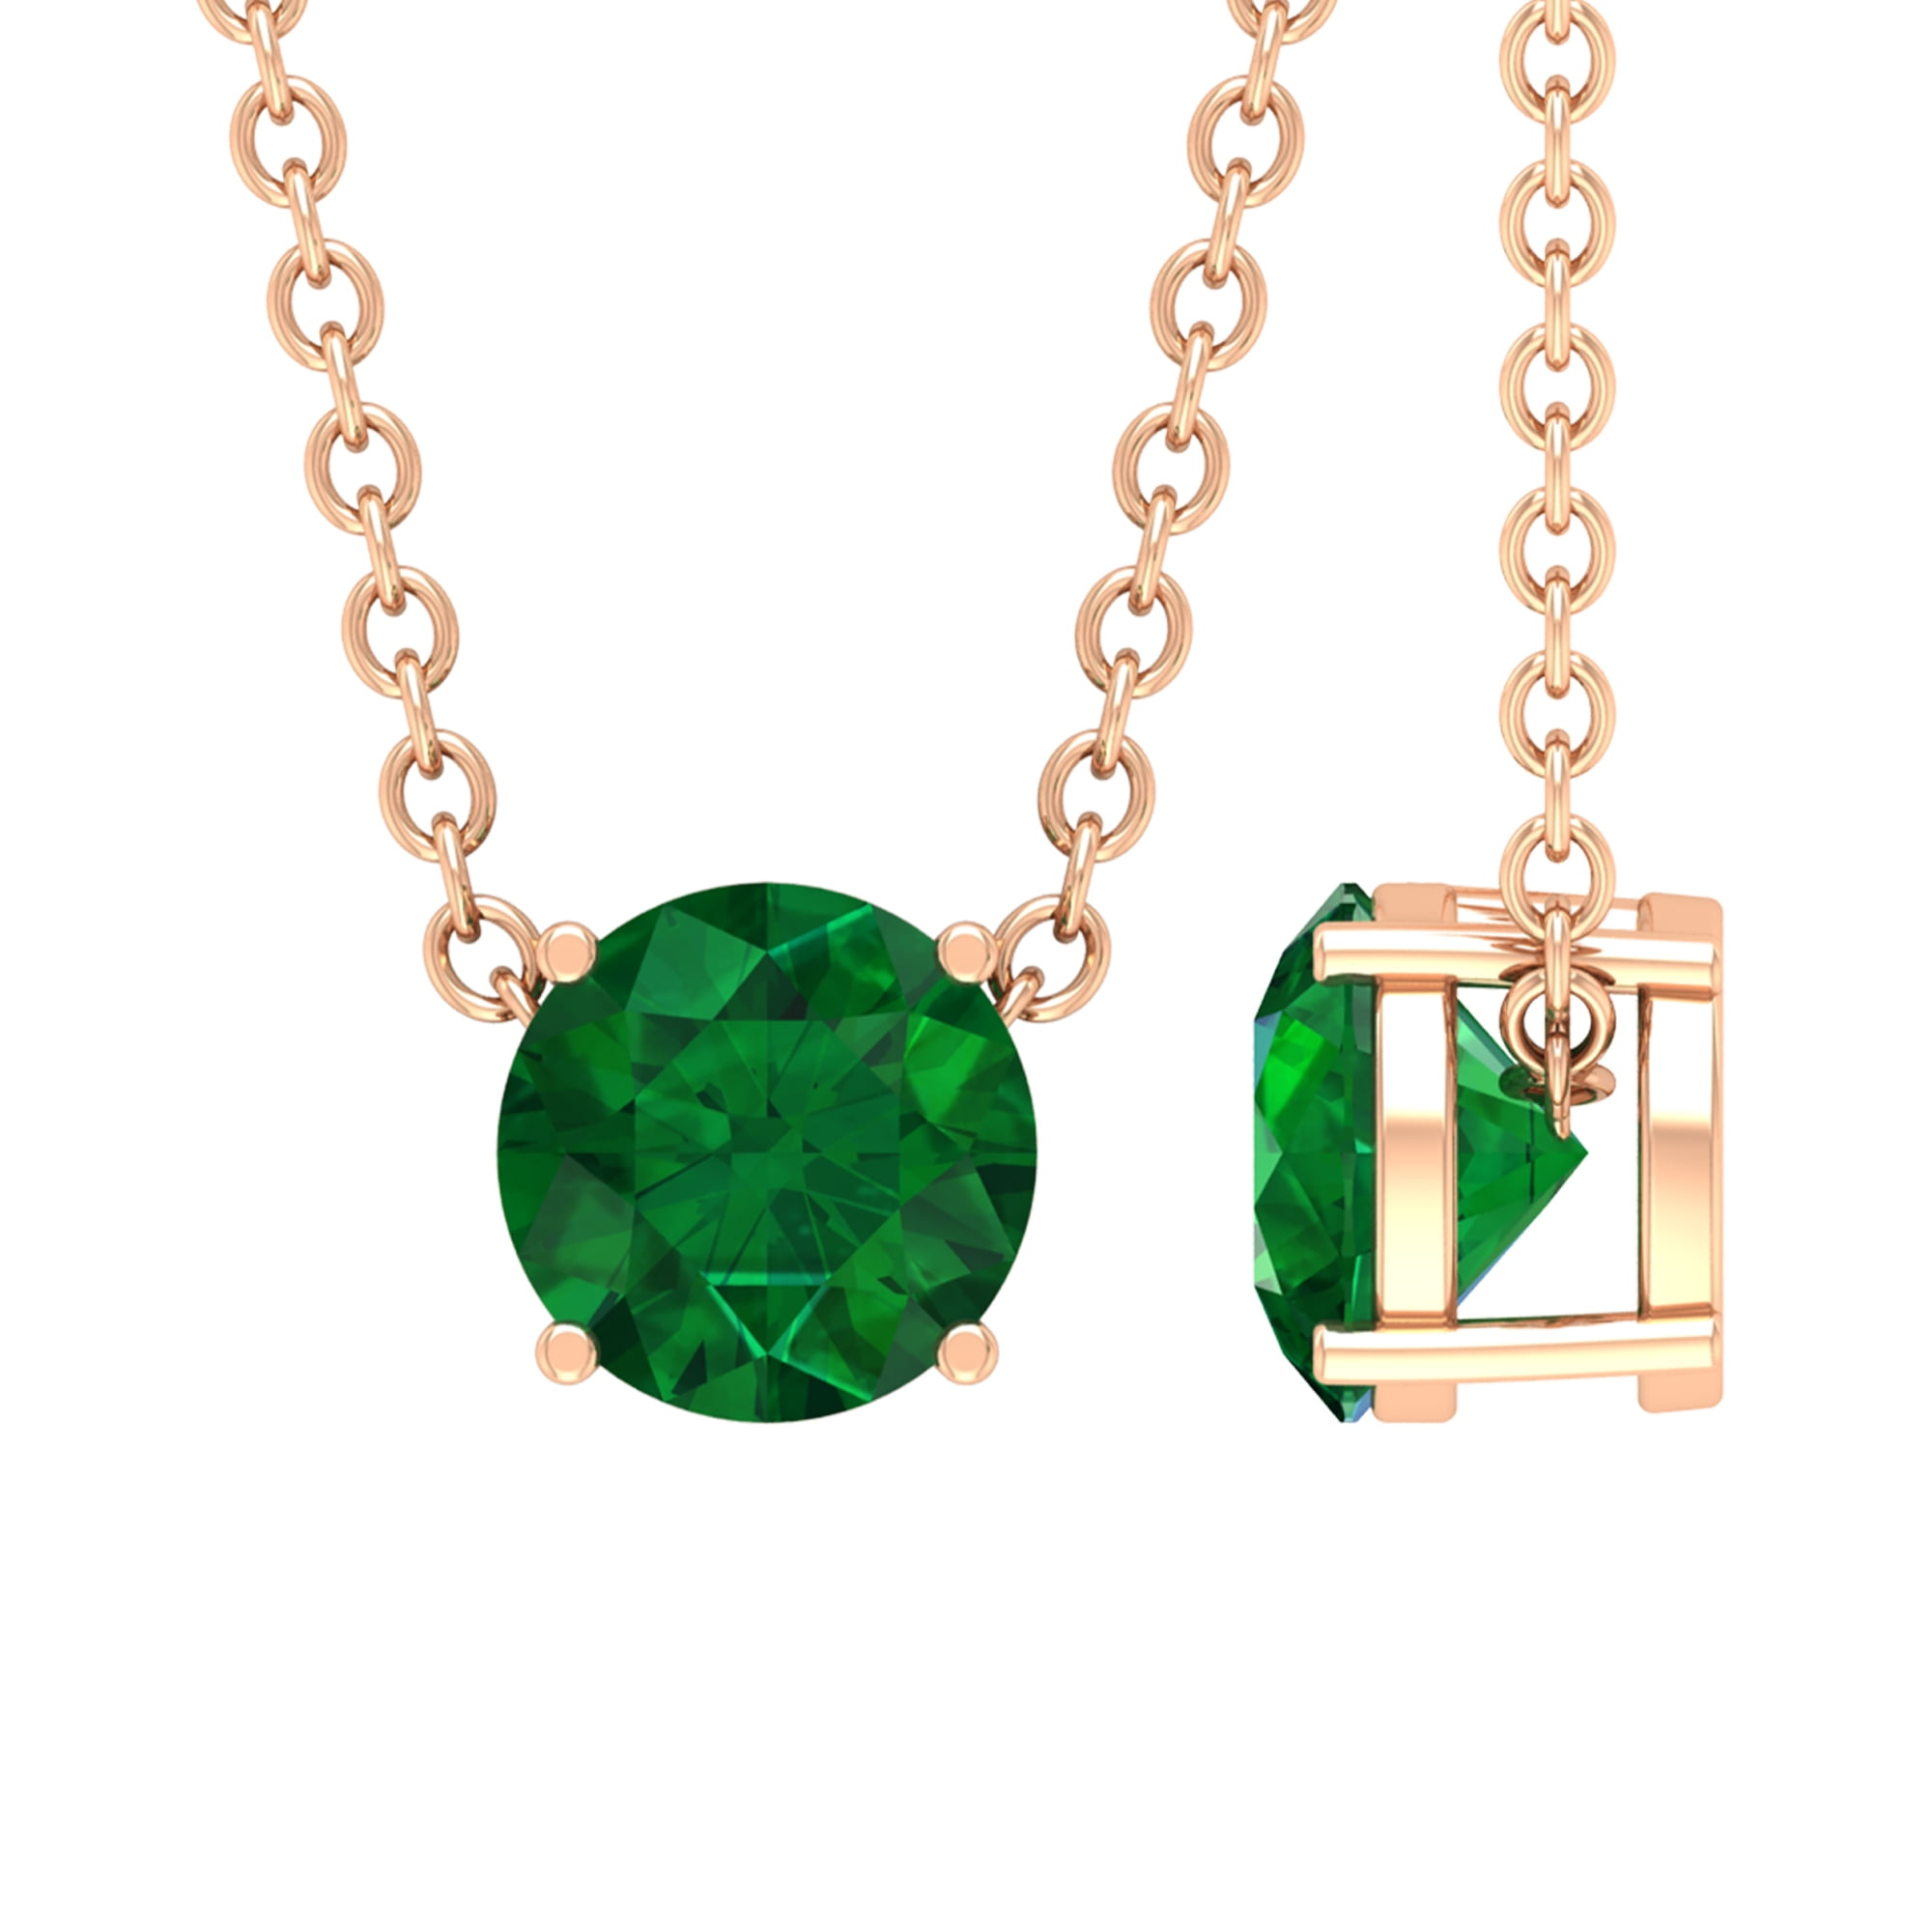 14k Yellow Gold Over 3ct Green Emerald Pendant 18" Chain Necklace For Women 